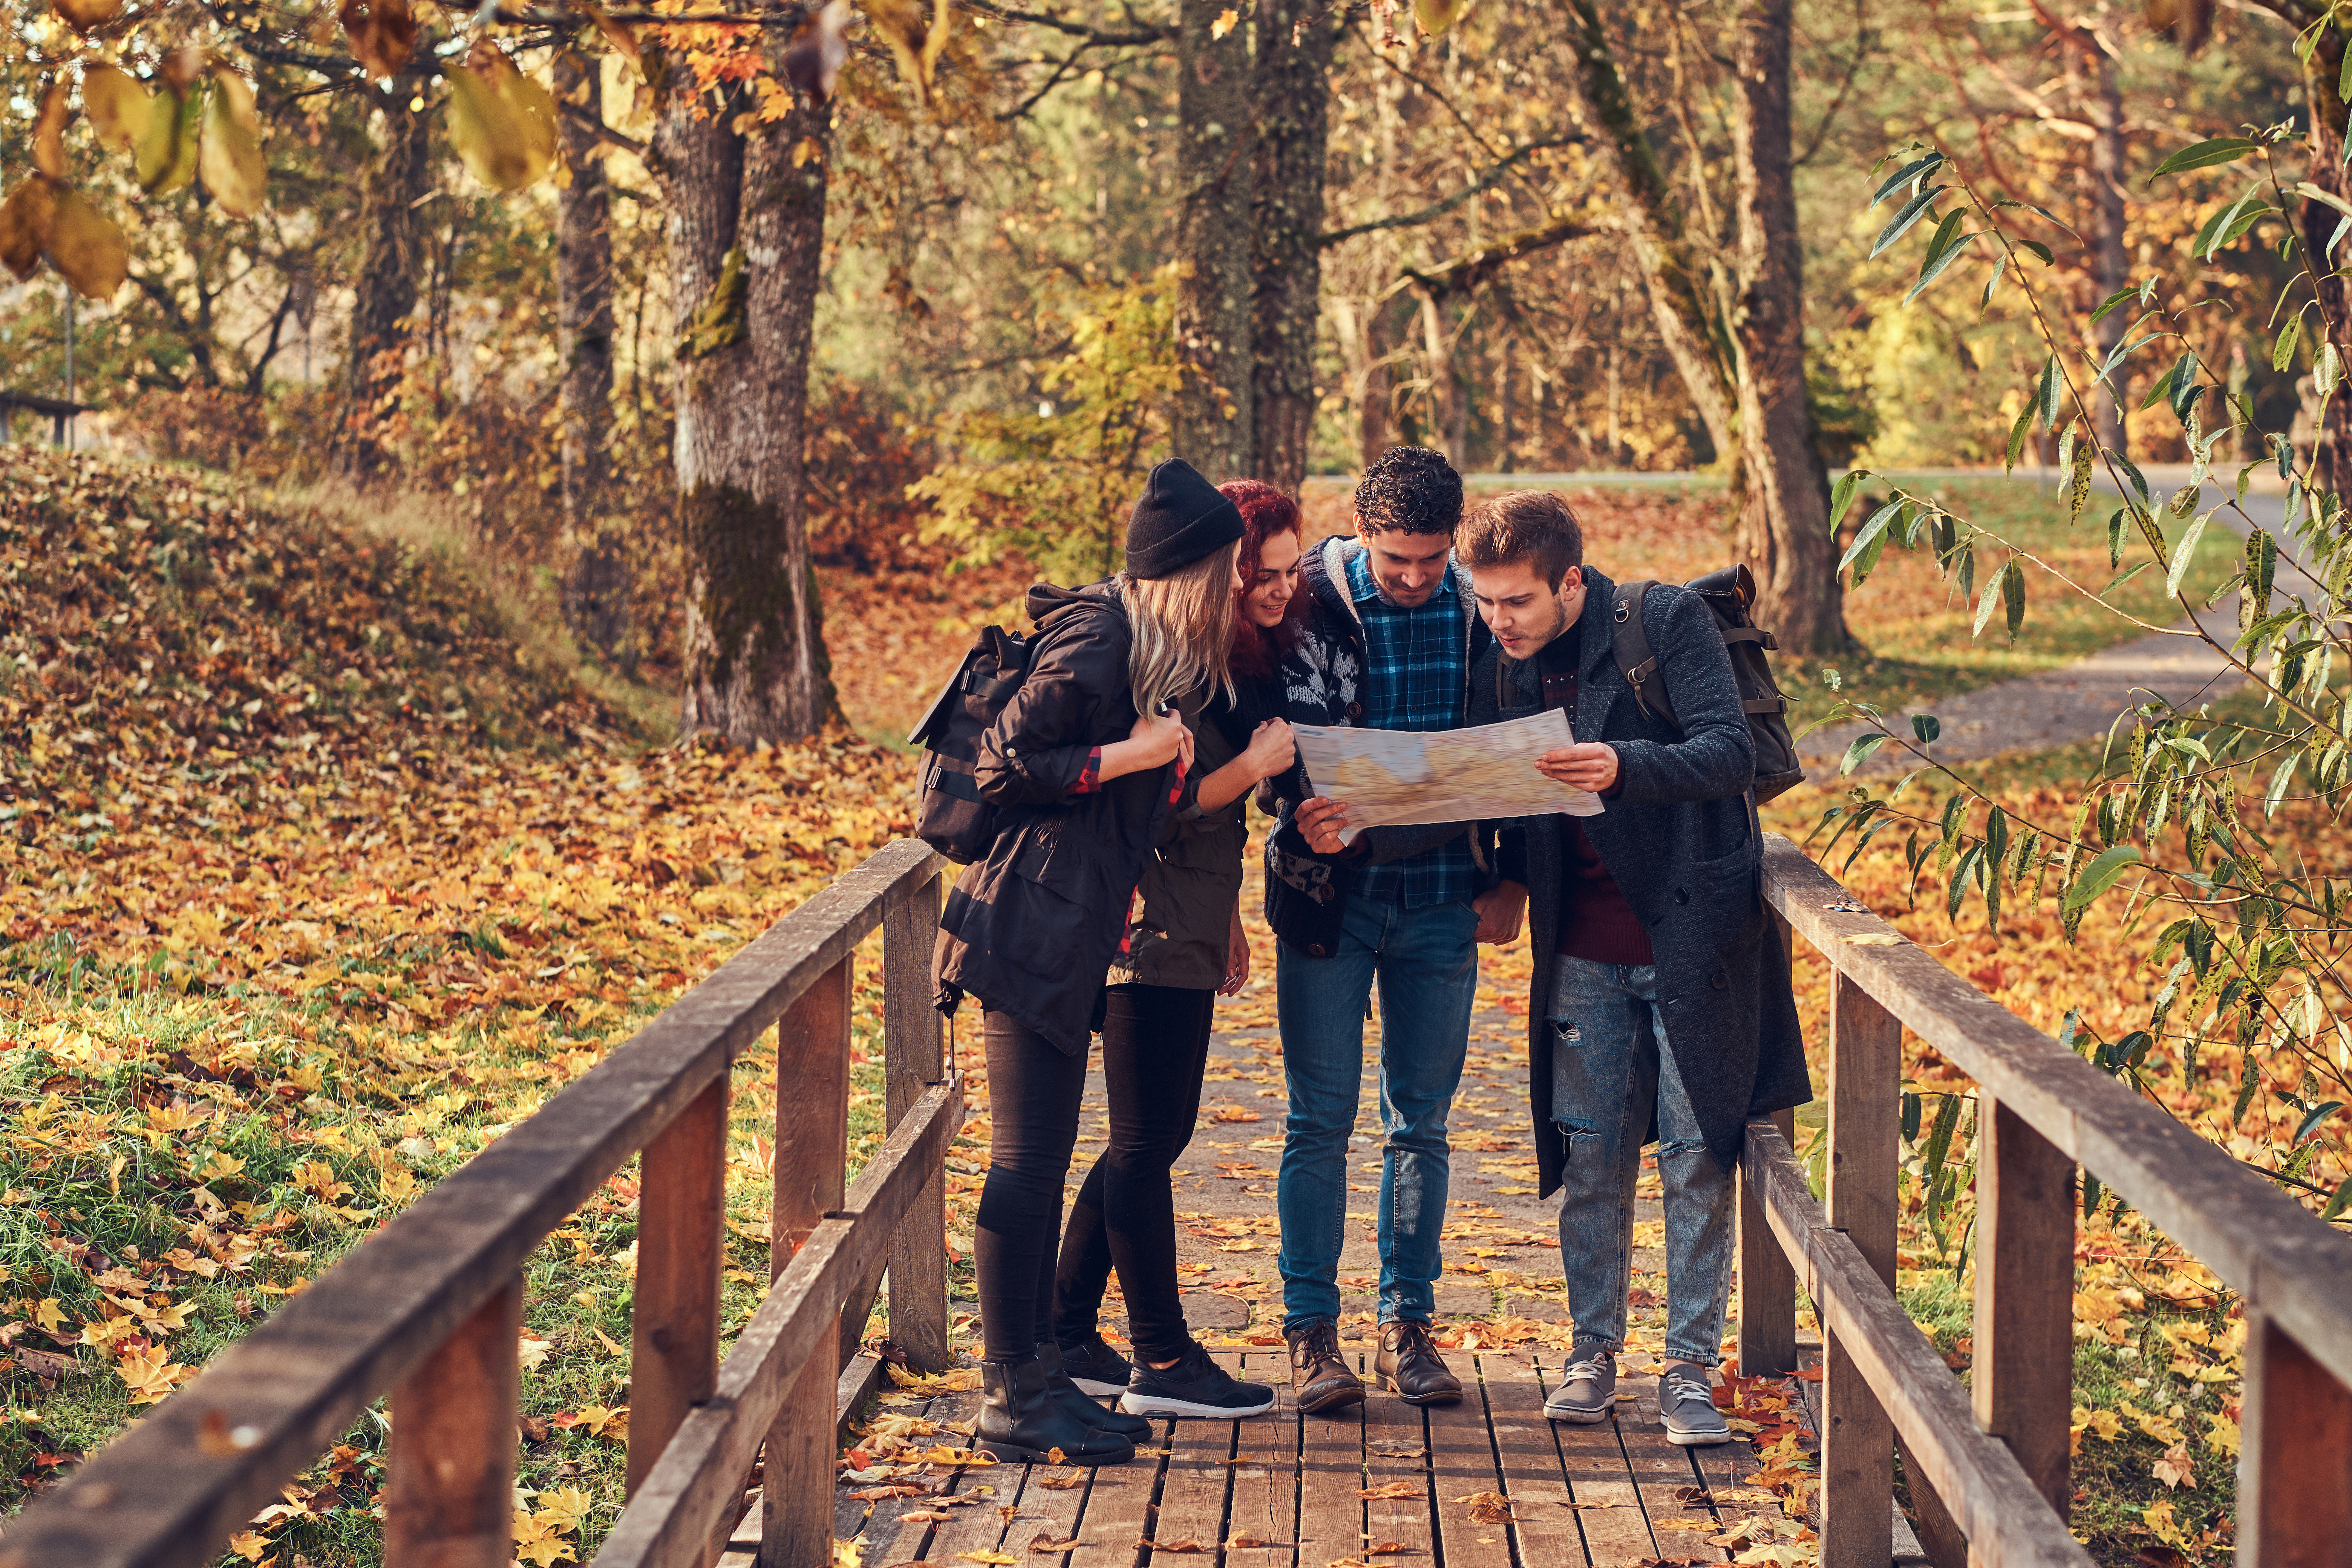 travel-hiking-adventure-concept-group-young-friends-hiking-autumn-colorful-forest-looking-map-planning-hike.jpg